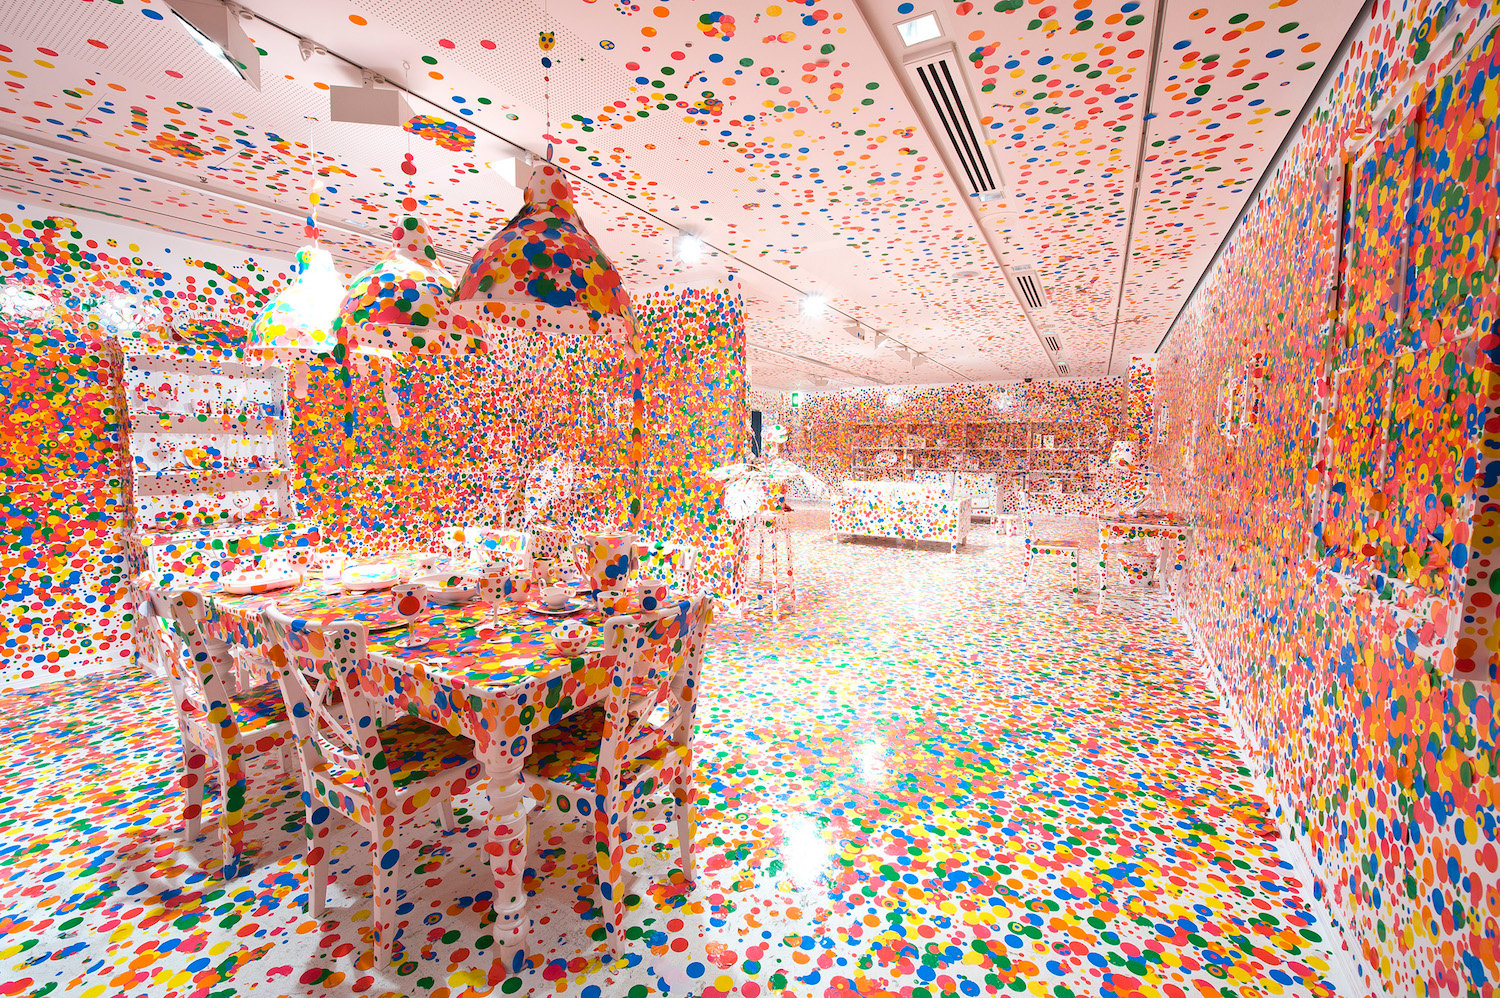 Yayoi Kusama S Playful Obliteration Room Has Been A Hit For Years Here Are Three Surprising Facts You Might Not Know About It Artnet News